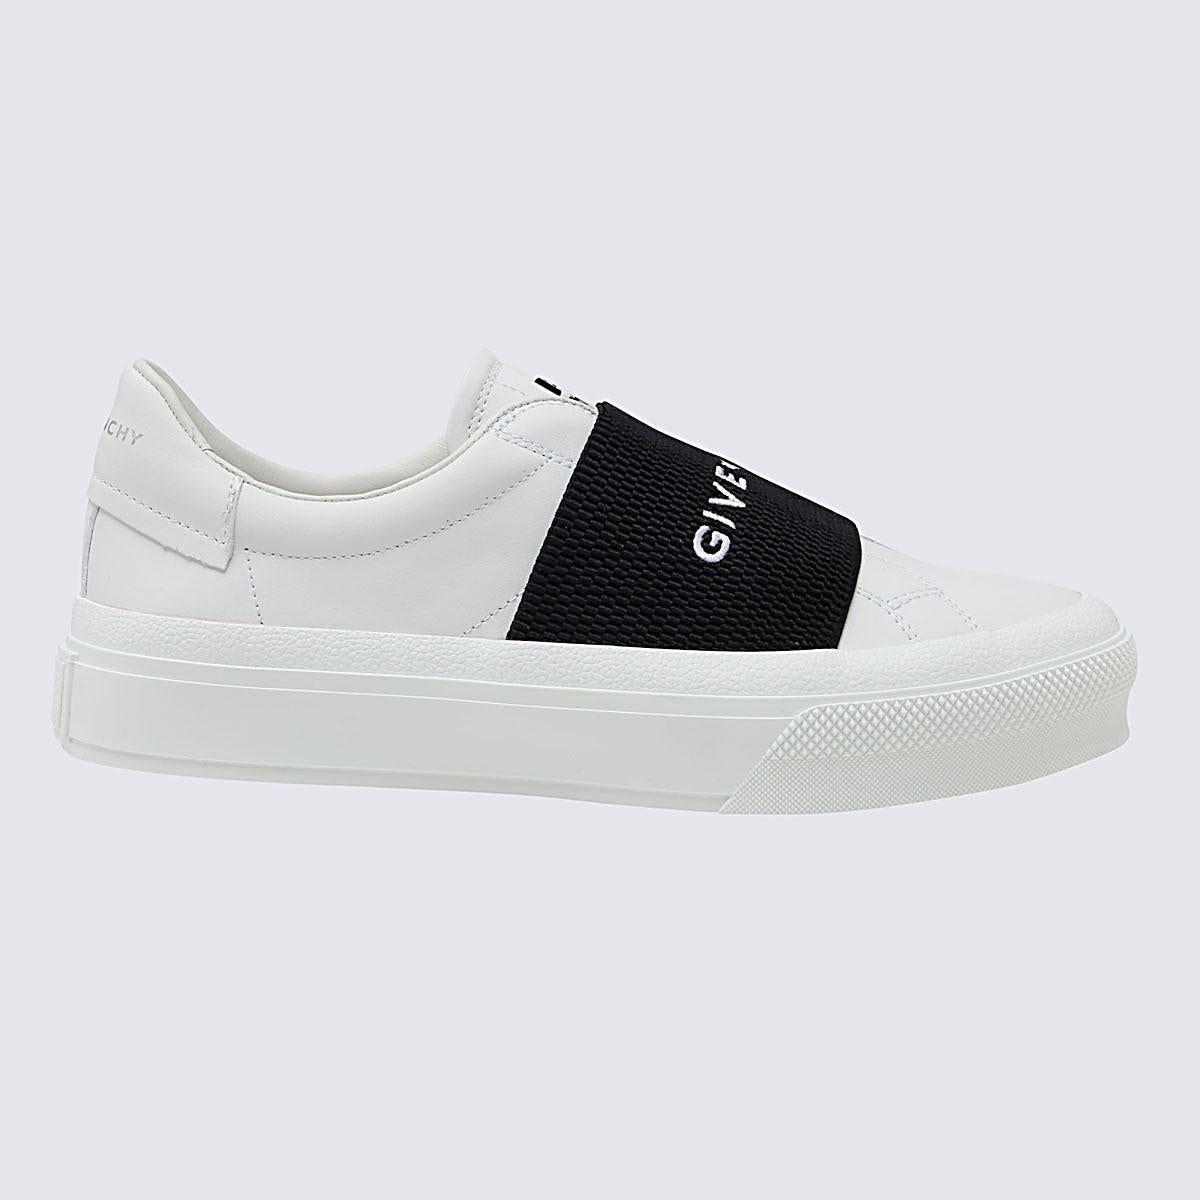 Givenchy Leather City Court Slip On Sneakers in Black | Lyst